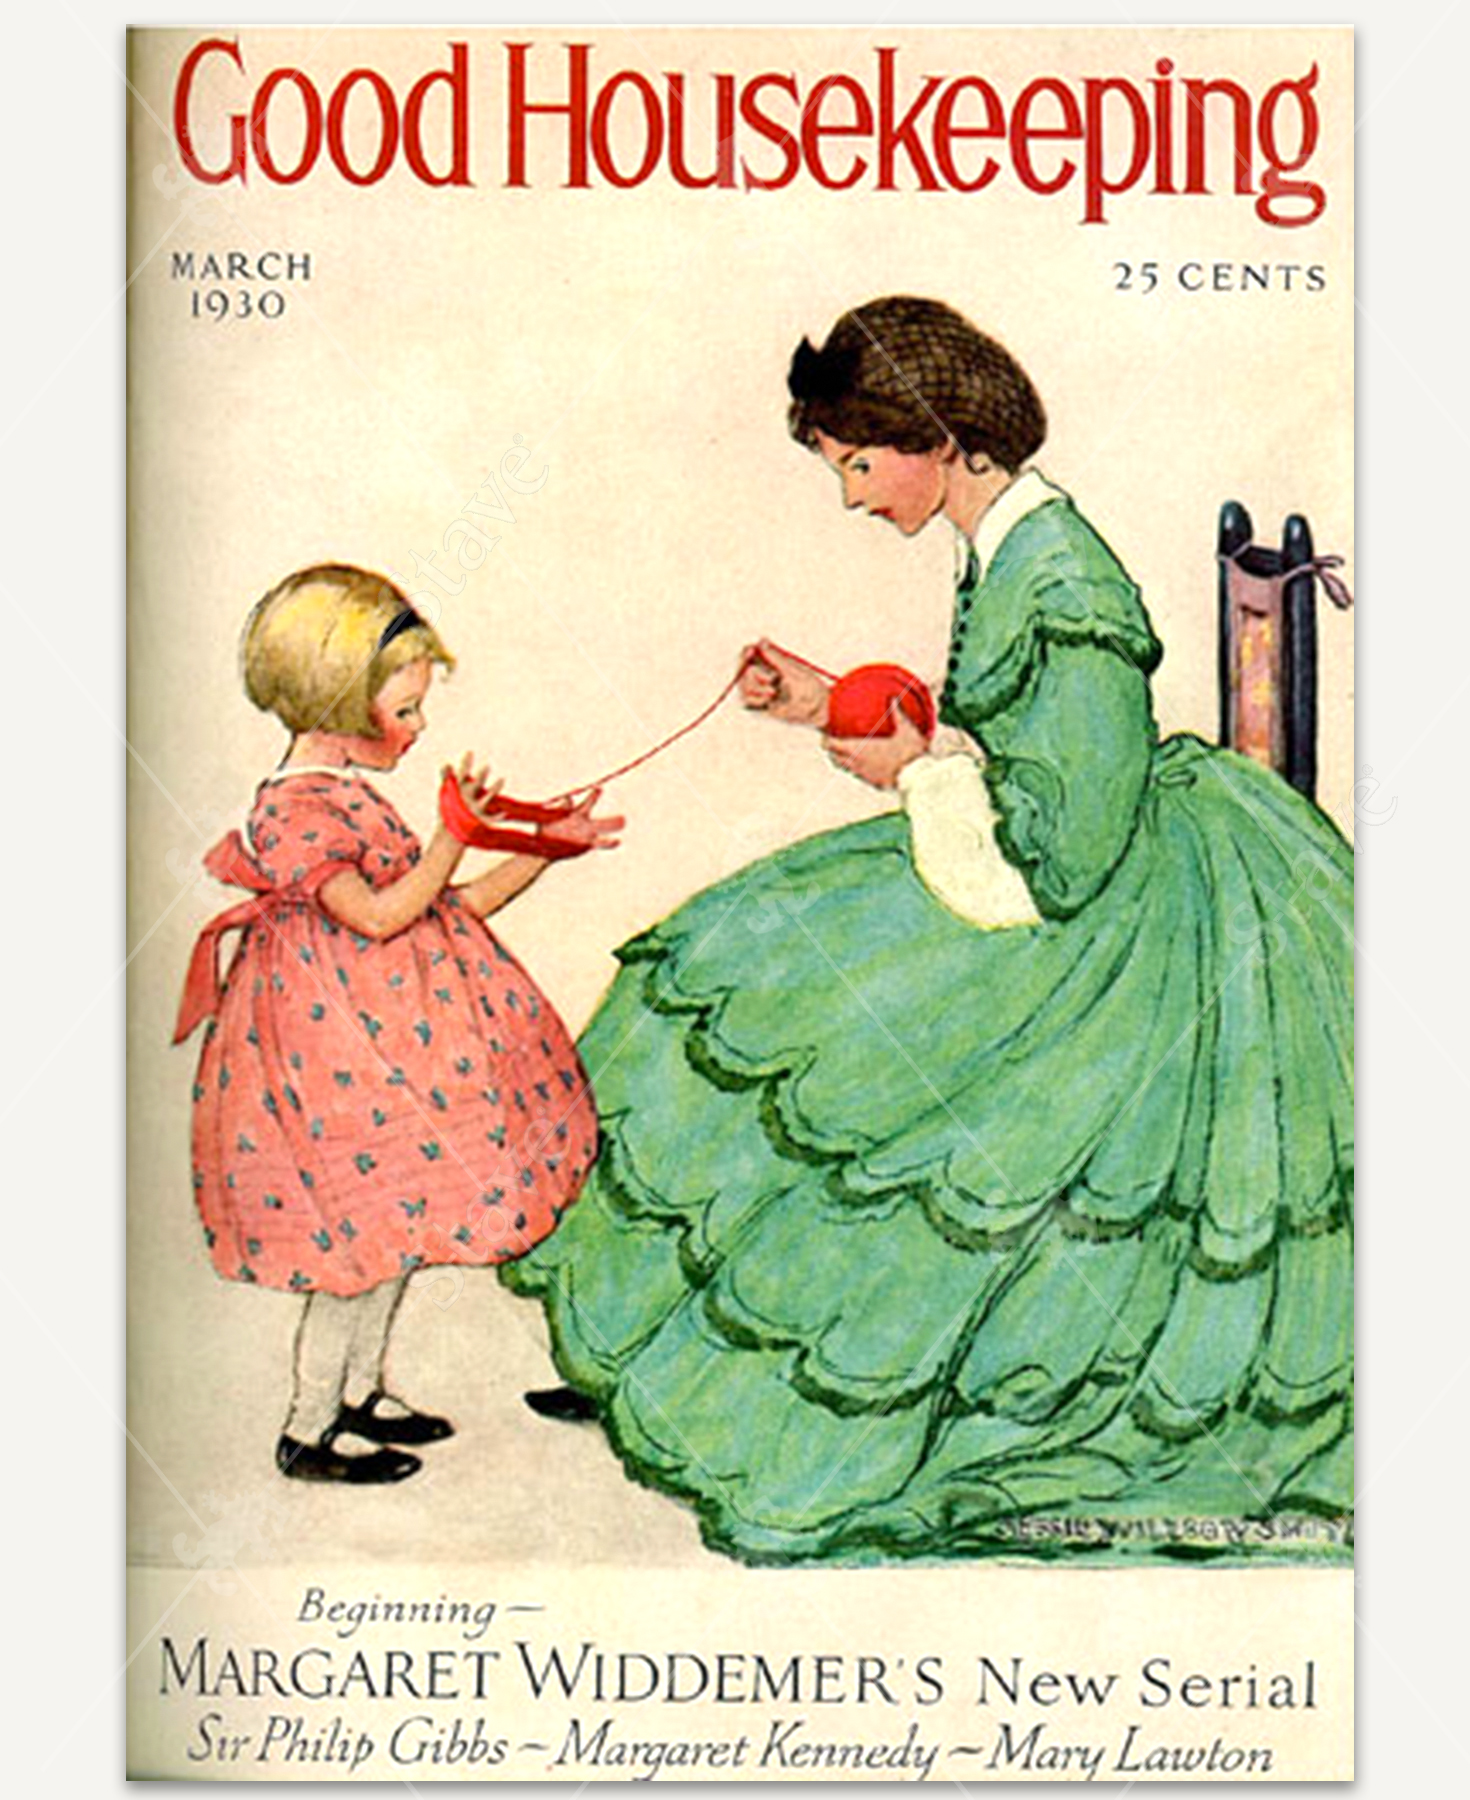 Good Housekeeping, March 1930_1